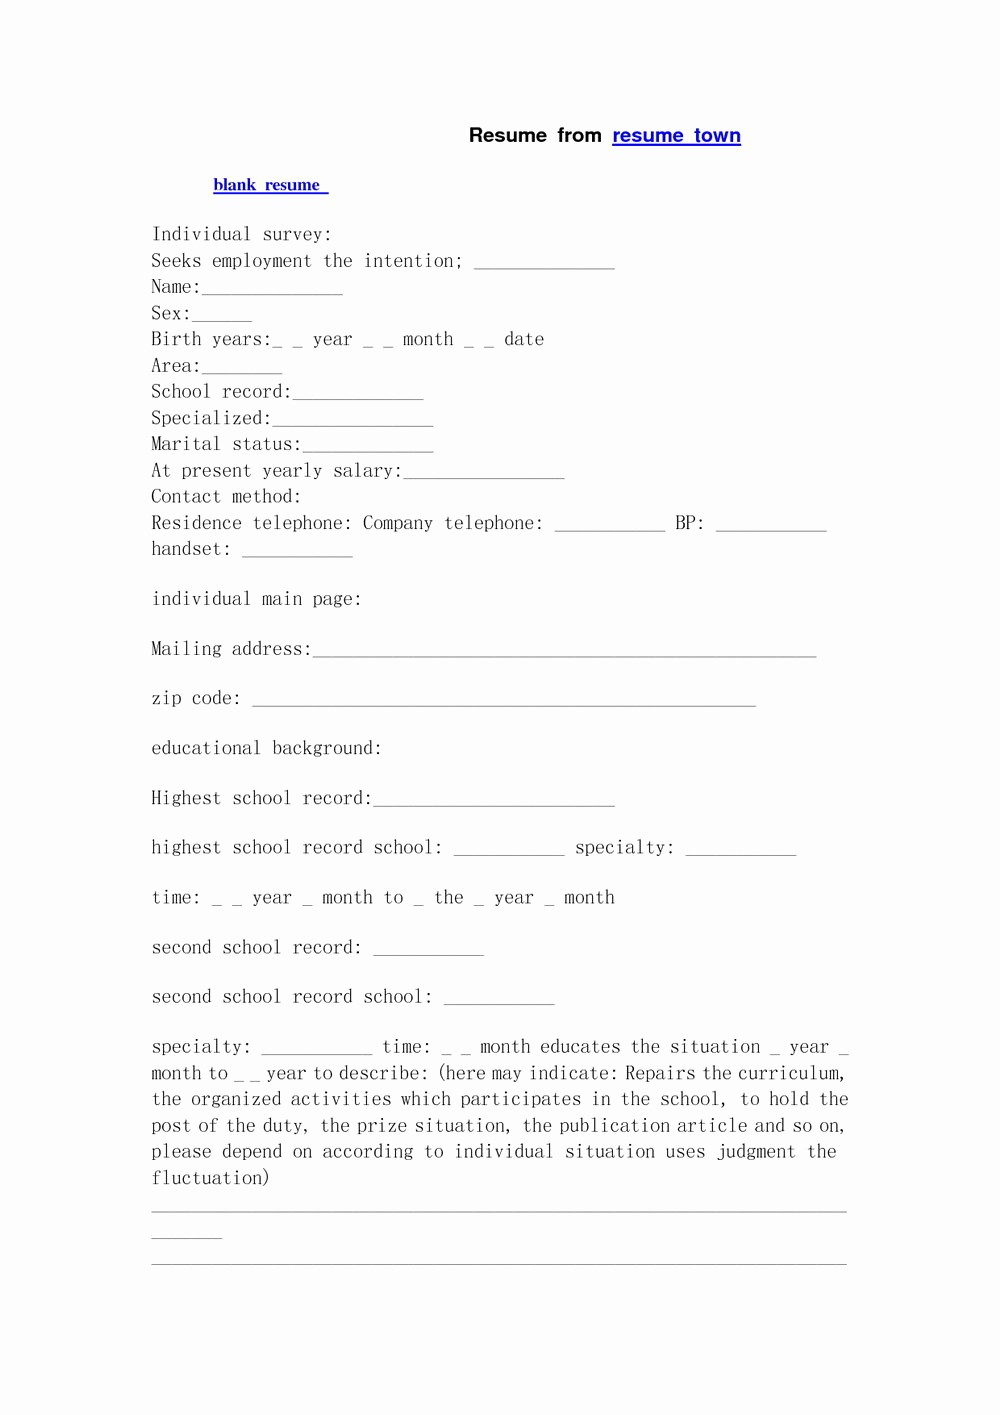 Form Of Resume for Job Luxury Blank Resume form to Fill Out